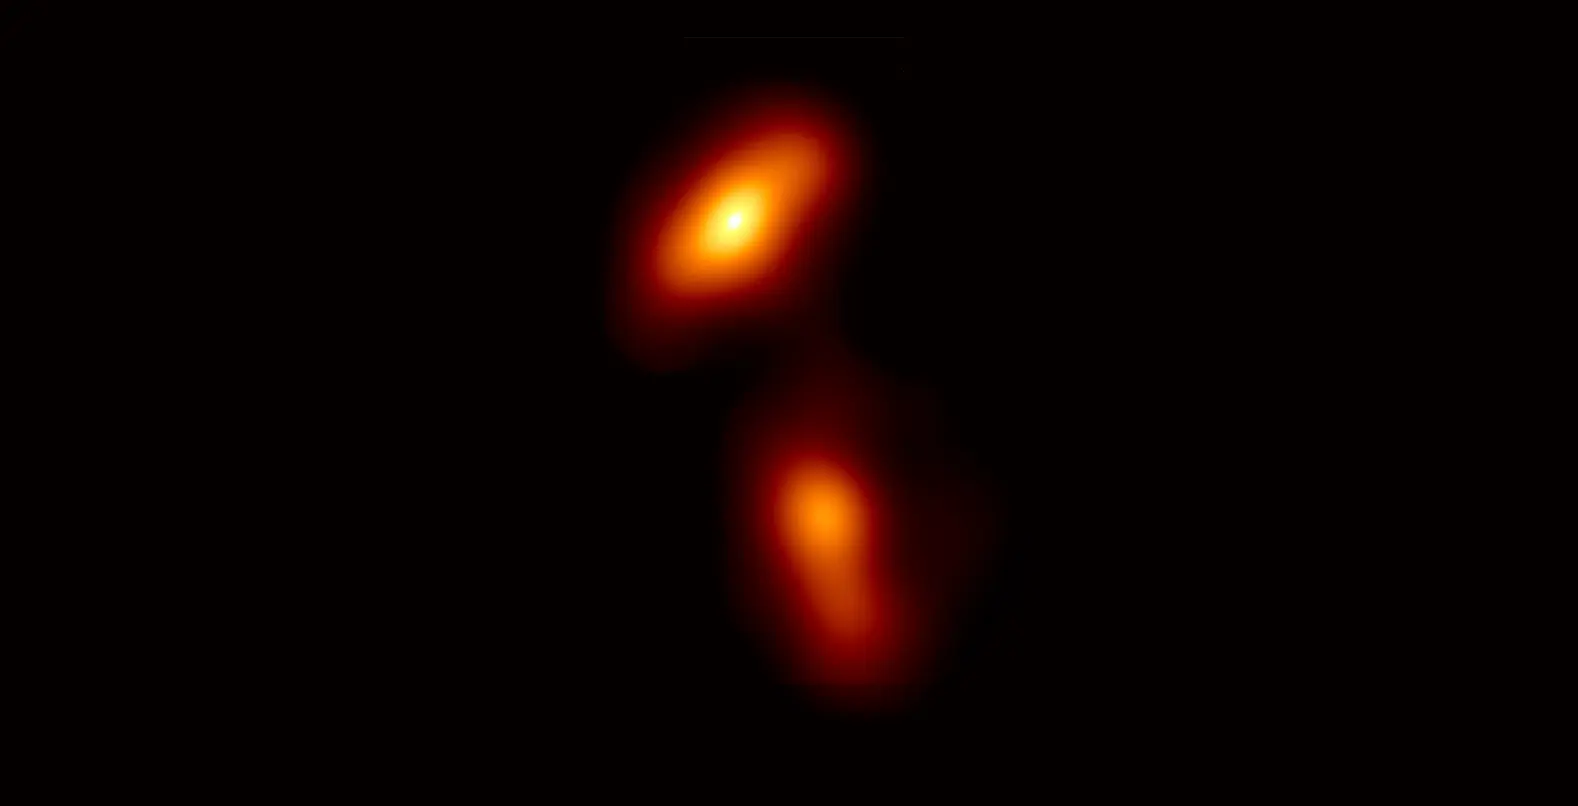 ALMA helps discover strange sideways structure in distant black hole jet